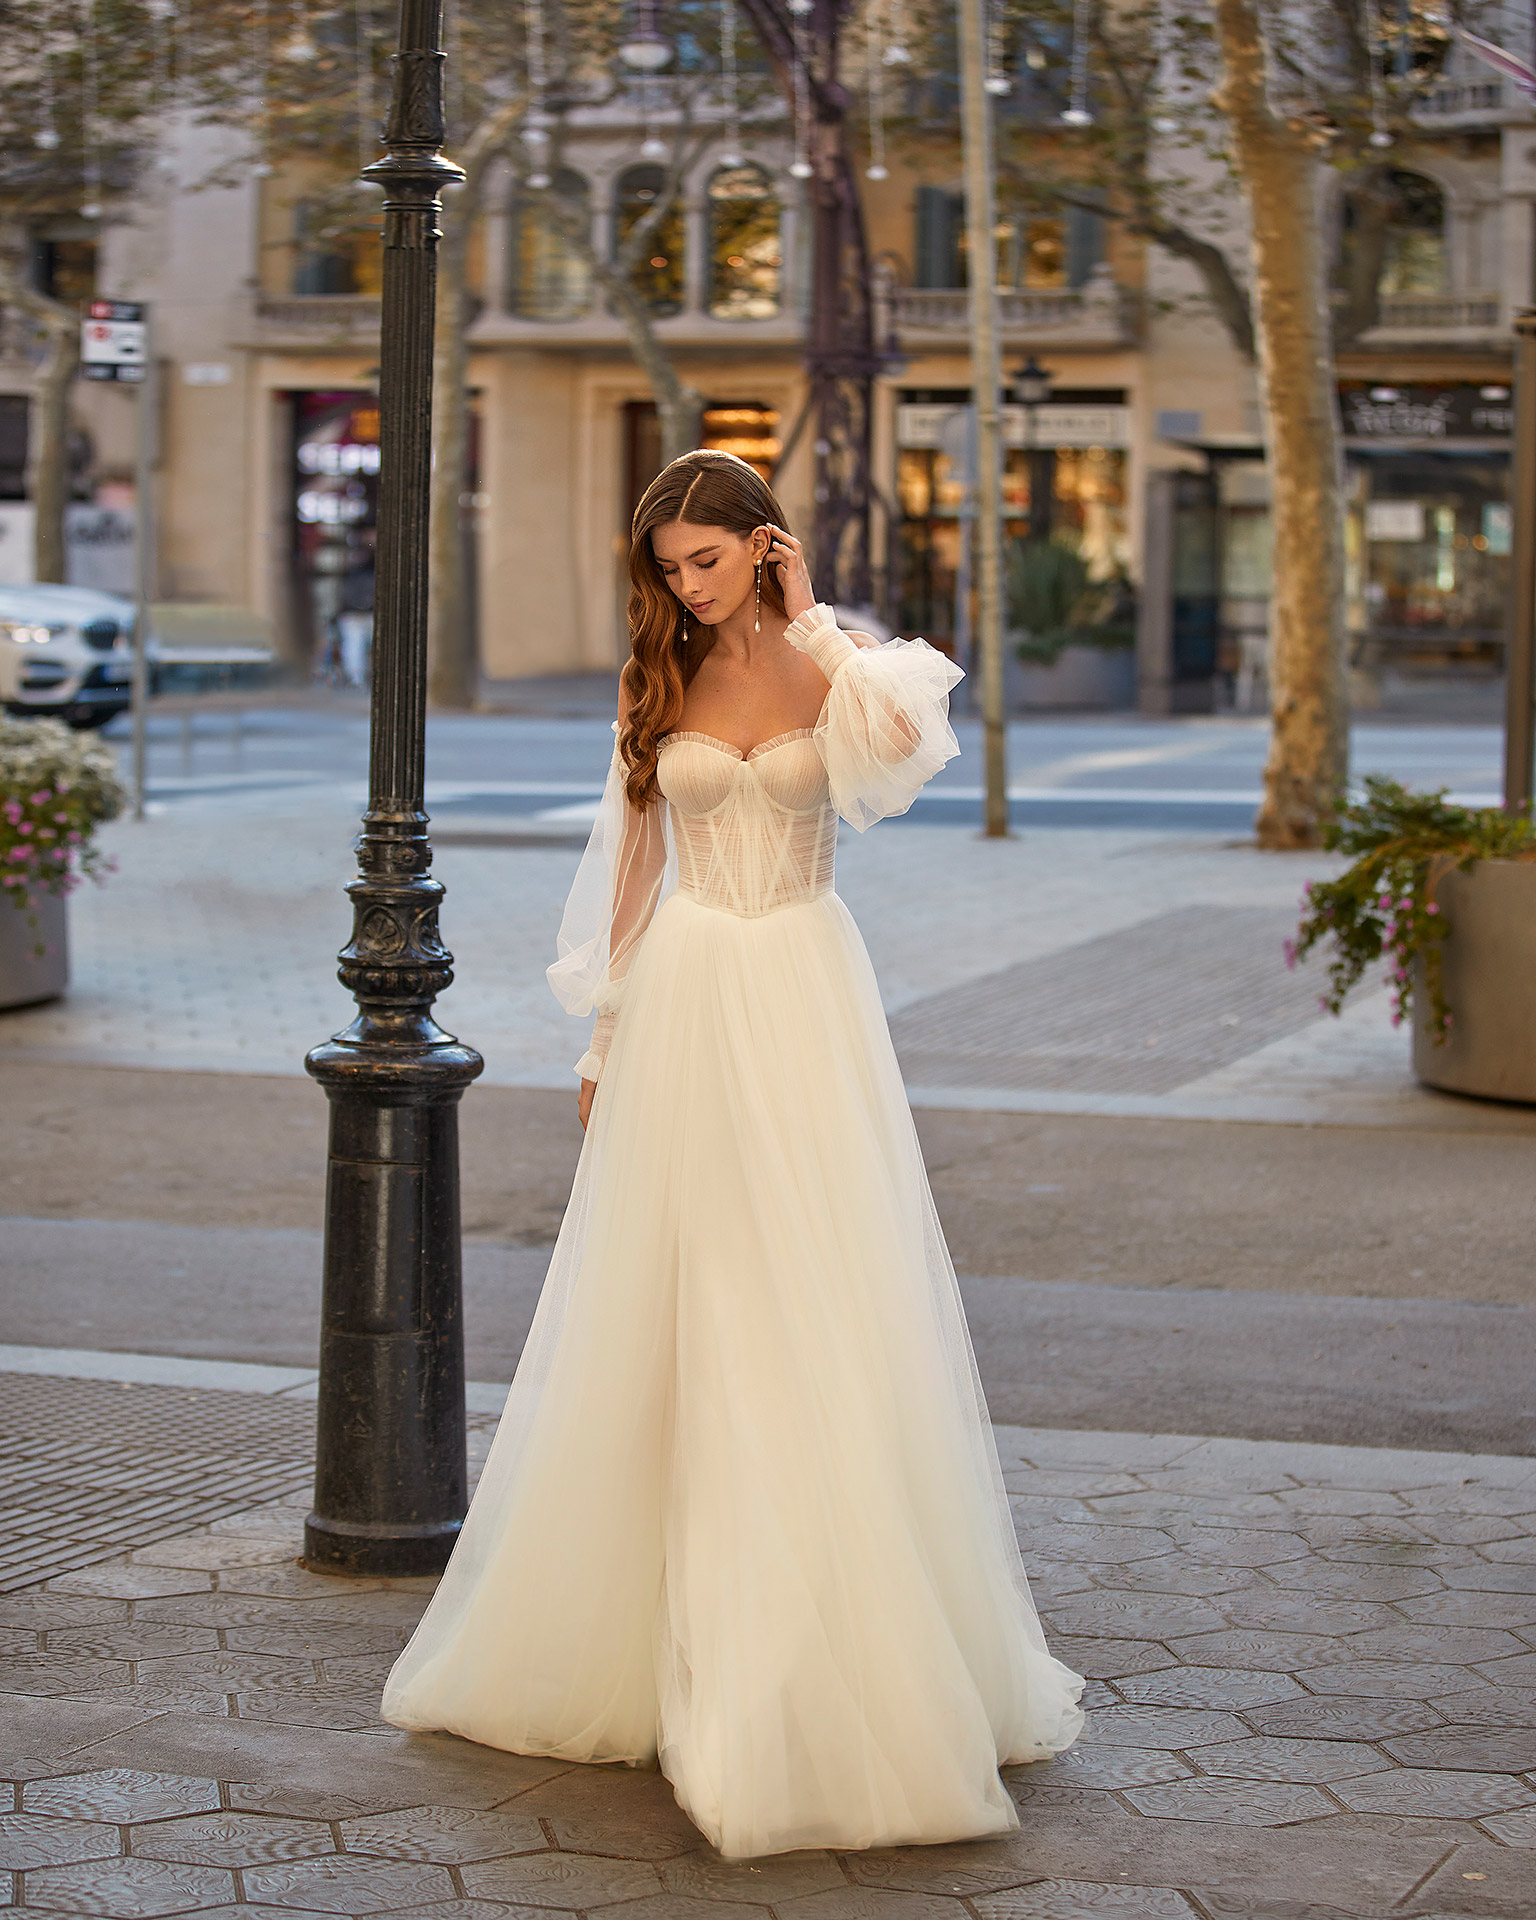 Modern princess-style wedding dress, made of soft tulle, with matching voluminous sleeves; with a push-up corset structure, a closed back, and long flowing tulle sleeves. Trendy Luna Novias outfit entirely made of soft tulle. LUNA_NOVIAS.